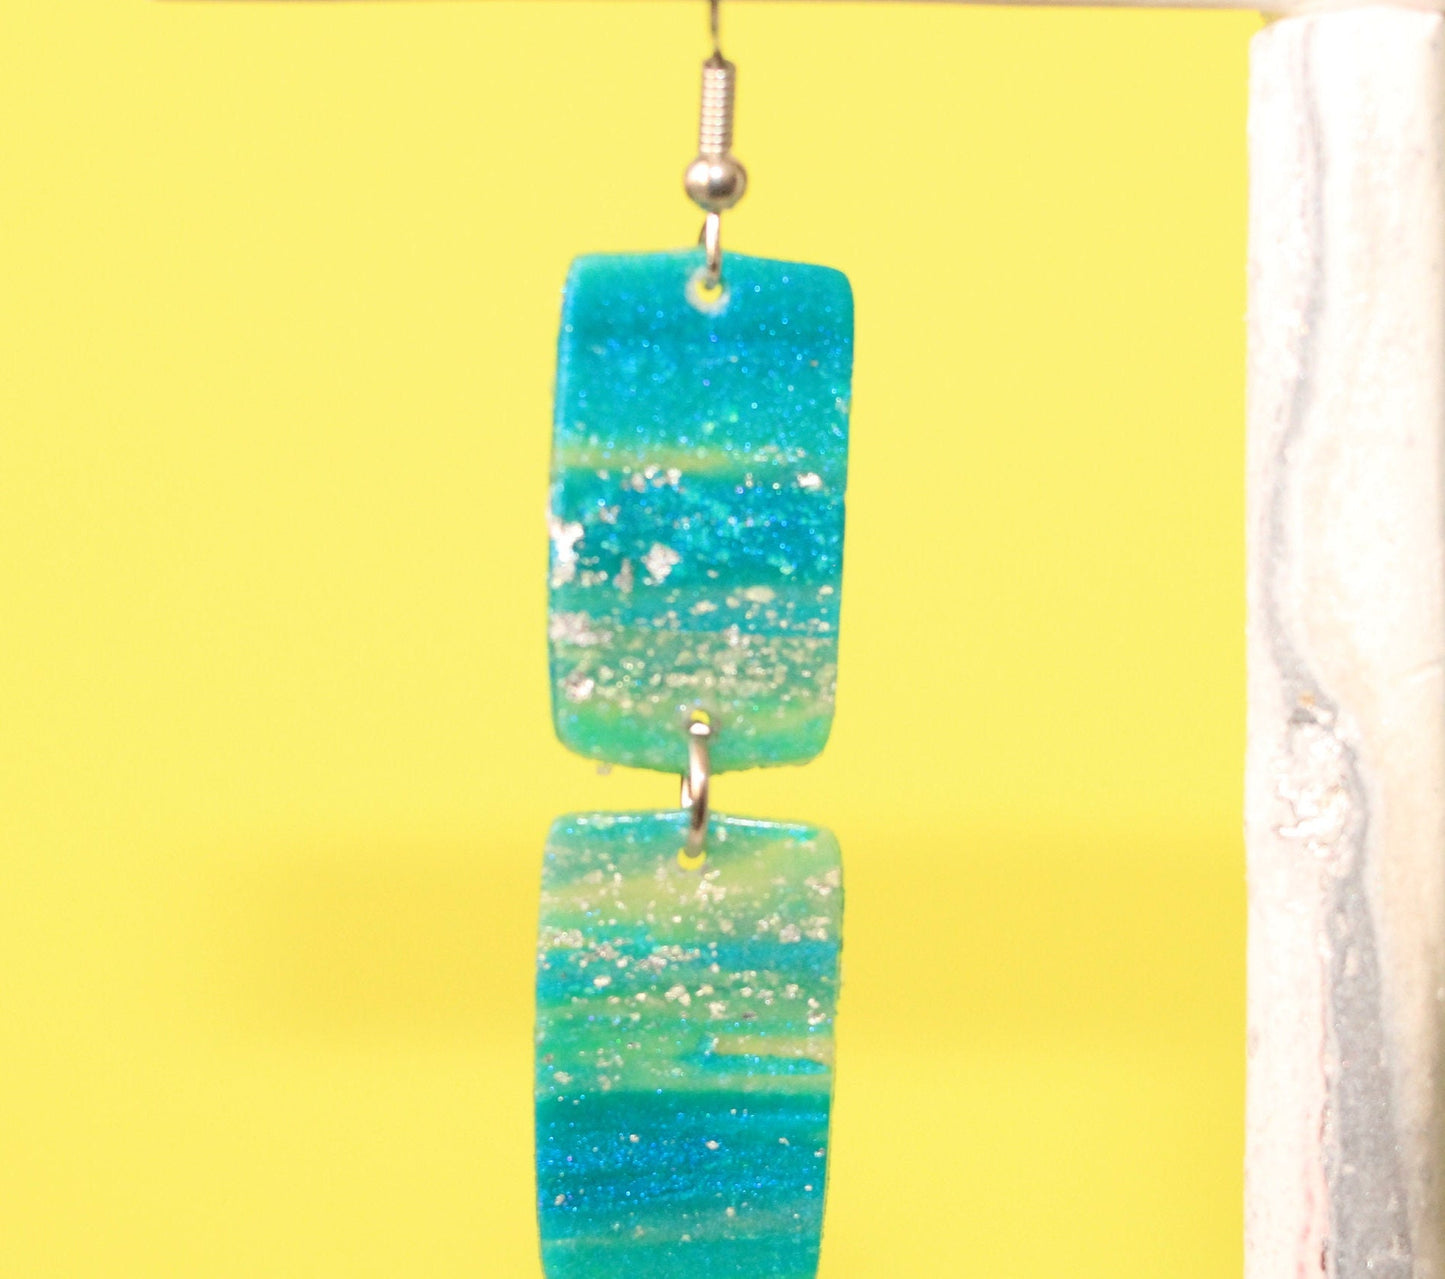 Turquoise Blue & Transparent White Polymer Clay Drop Earrings w/Silver Foil Accent - Variant 5